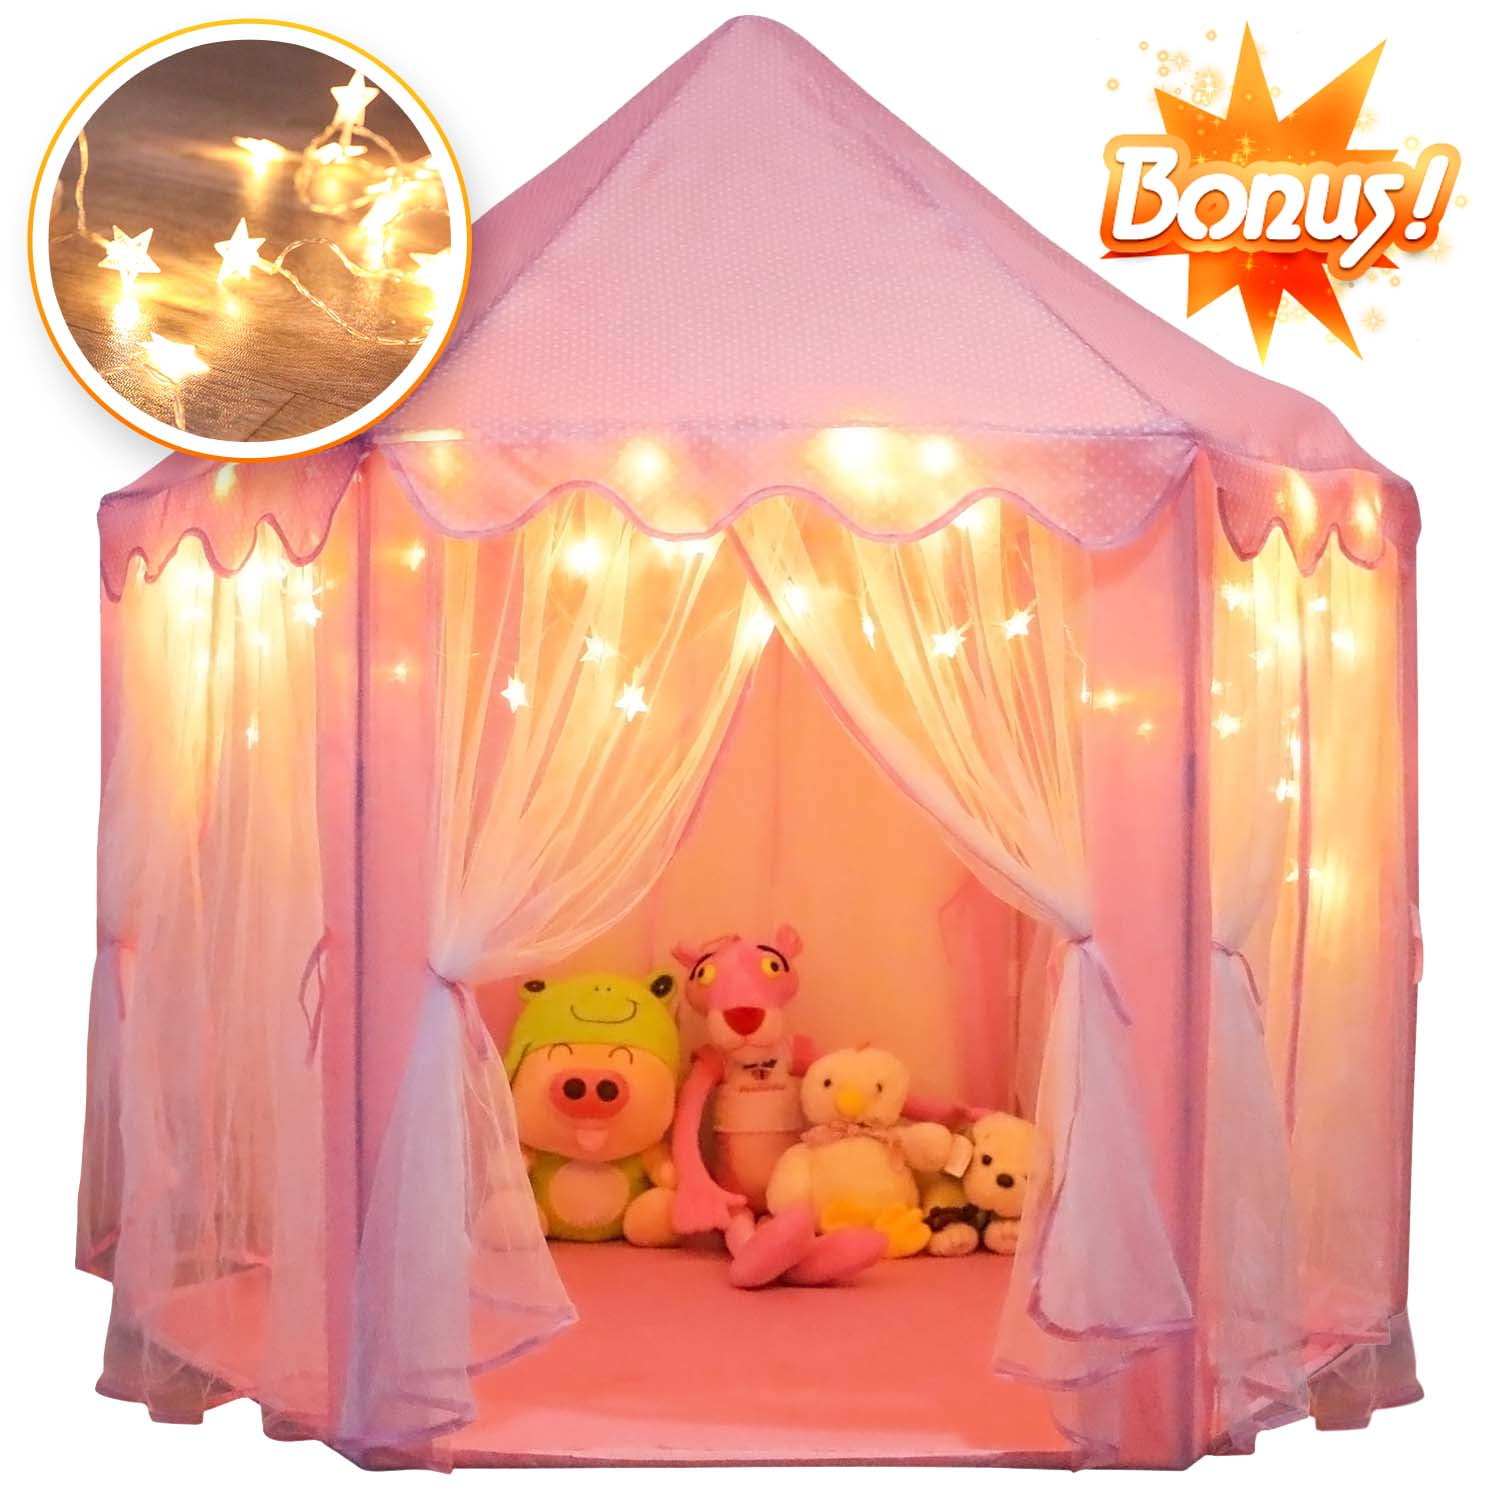 Sunnyglade 55 x 53 Princess Tent with 8.2 Feet Big and Large Star Lights Girls Large Playhouse Kids Castle Play Tent for Children Indoor and Outdoor Games 